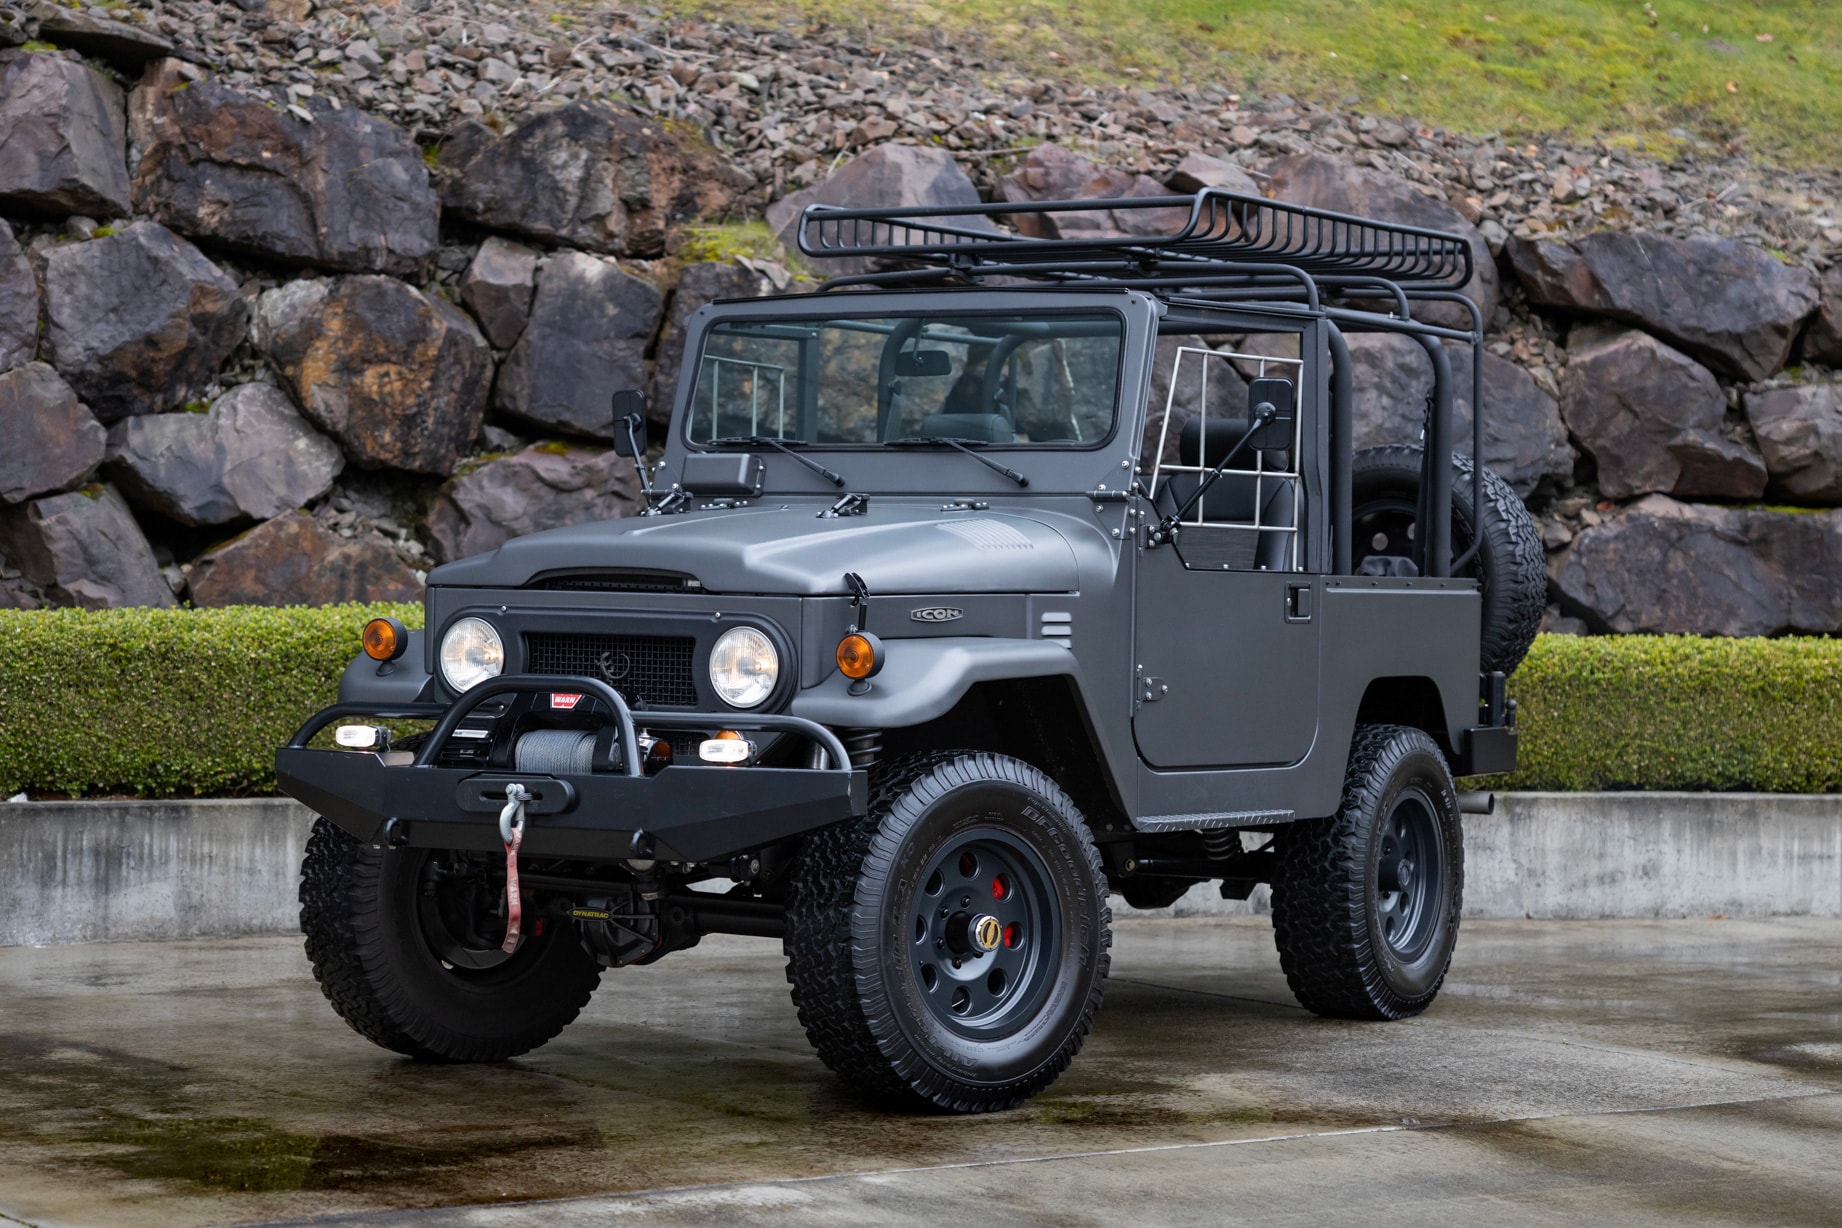 1962 ICON FJ40 Land Cruiser Collecting Cars Listing 4x4 off-roading jeeps FJ Cruiser classic cars auctions 